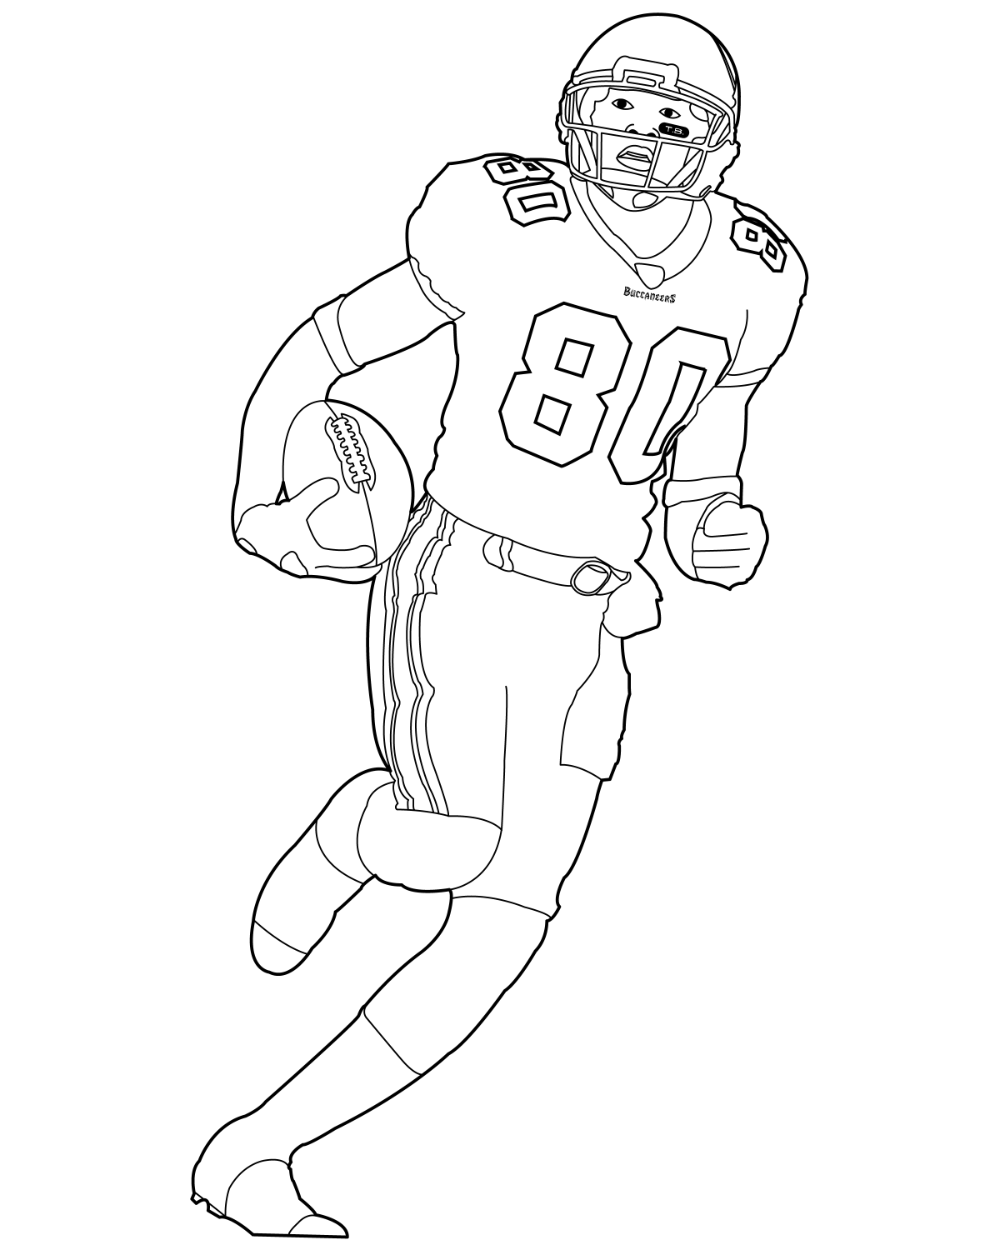 Football Players Coloring Pages Nfl - Gallery - Clip Art Library | Football coloring  pages, Sports coloring pages, Football player drawing